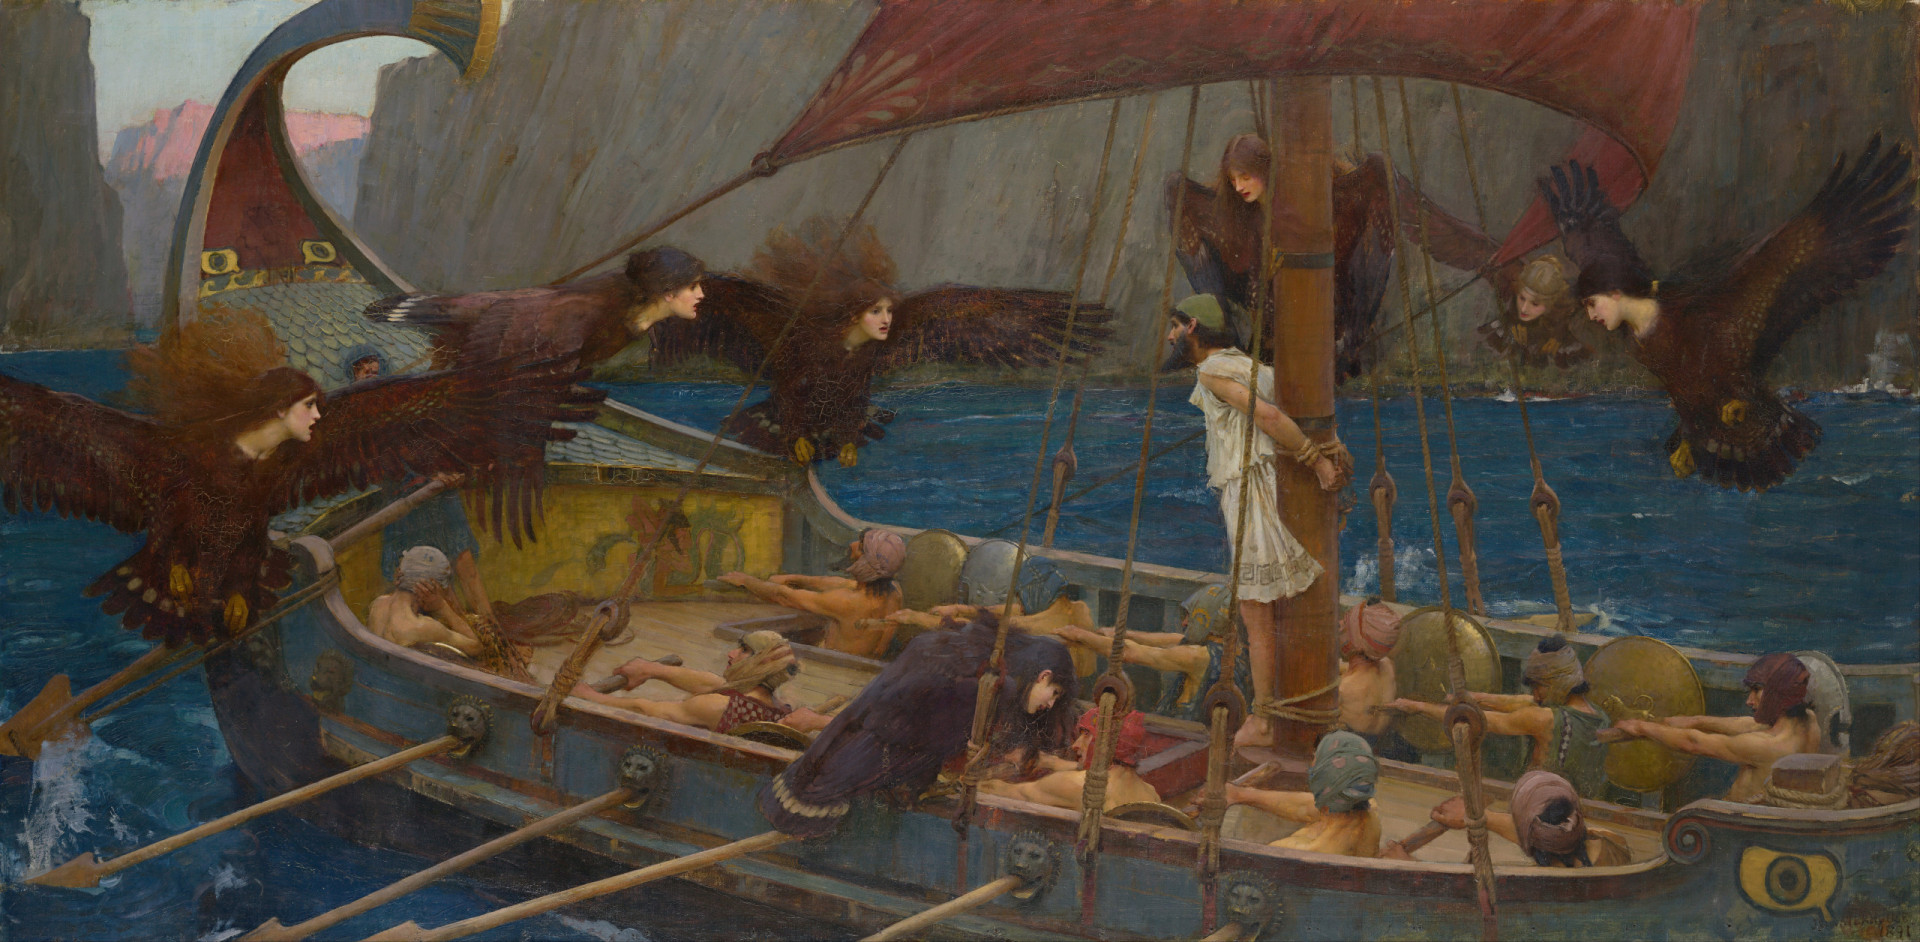 <p>Odysseus was curious to hear the Sirens' song without succumbing to their lure, and so he alone listened while bound to the mast. As they sailed past, he was entranced and begged to be released, but his loyal crew kept him securely fastened until they were safely out of earshot.</p><p>You may also like:<a href="https://www.starsinsider.com/n/369281?utm_source=msn.com&utm_medium=display&utm_campaign=referral_description&utm_content=739826en-us"> Incredible historic images of D-Day</a></p>